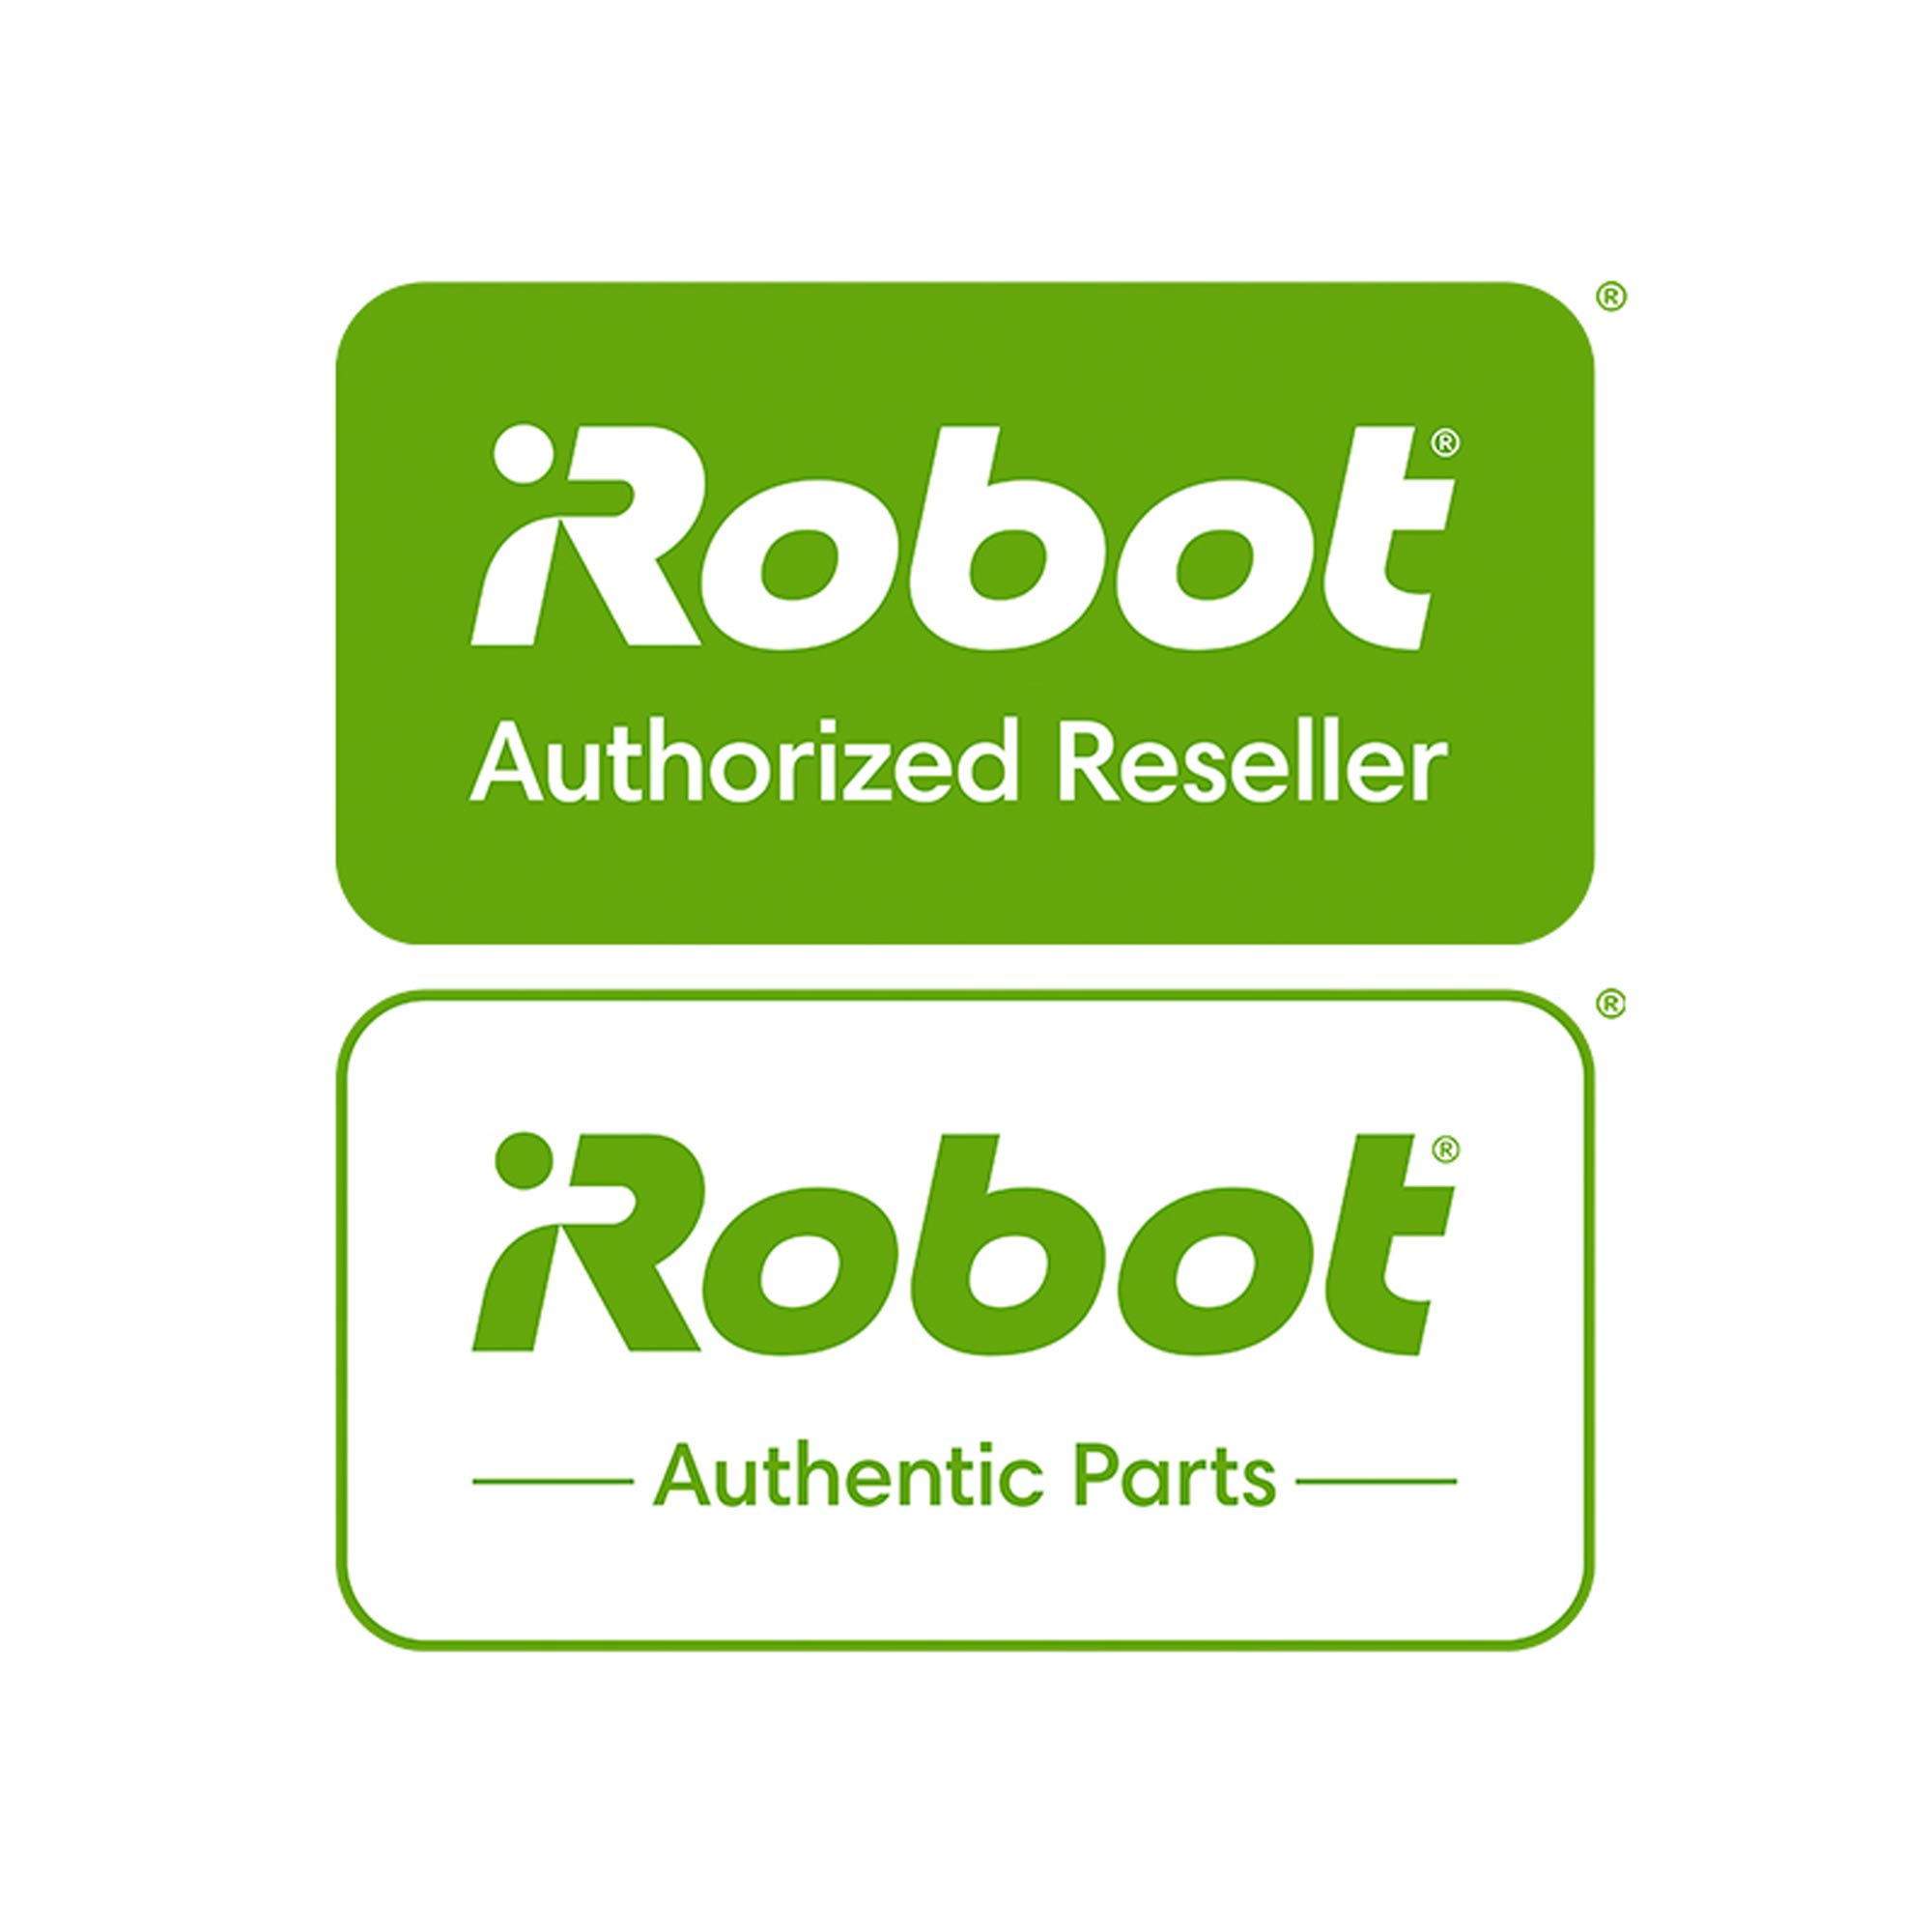 iRobot Authentic Replacement Parts- Roomba 800 & 900 Series Multi-Surface Rubber Brushes (1 Set of Multi-Surface Rubber Brushes)